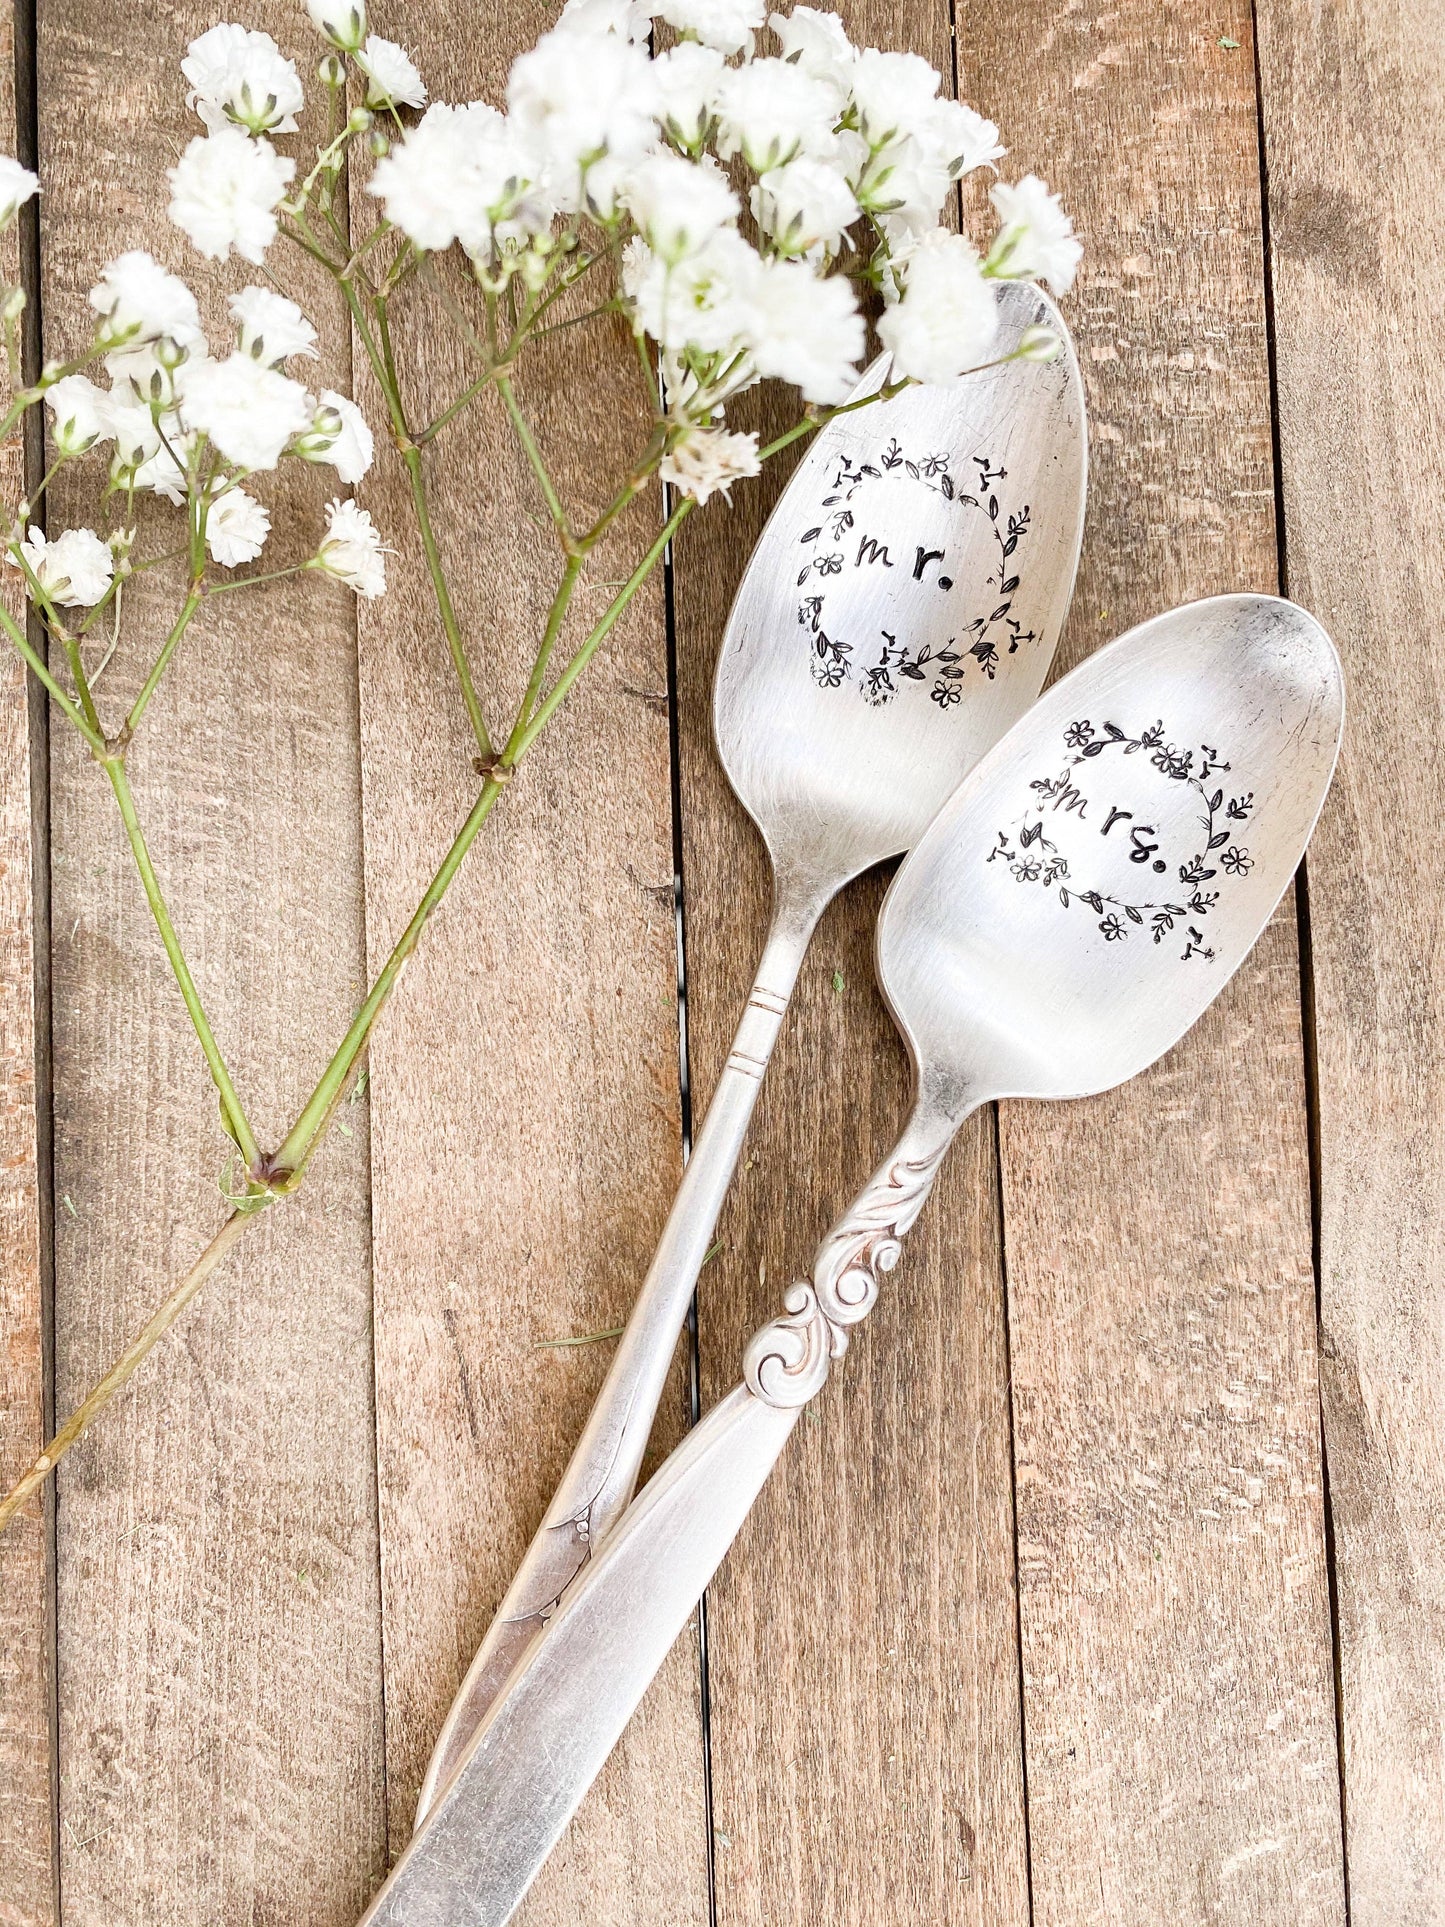 Mr and Mrs Wedding Gift Spoons